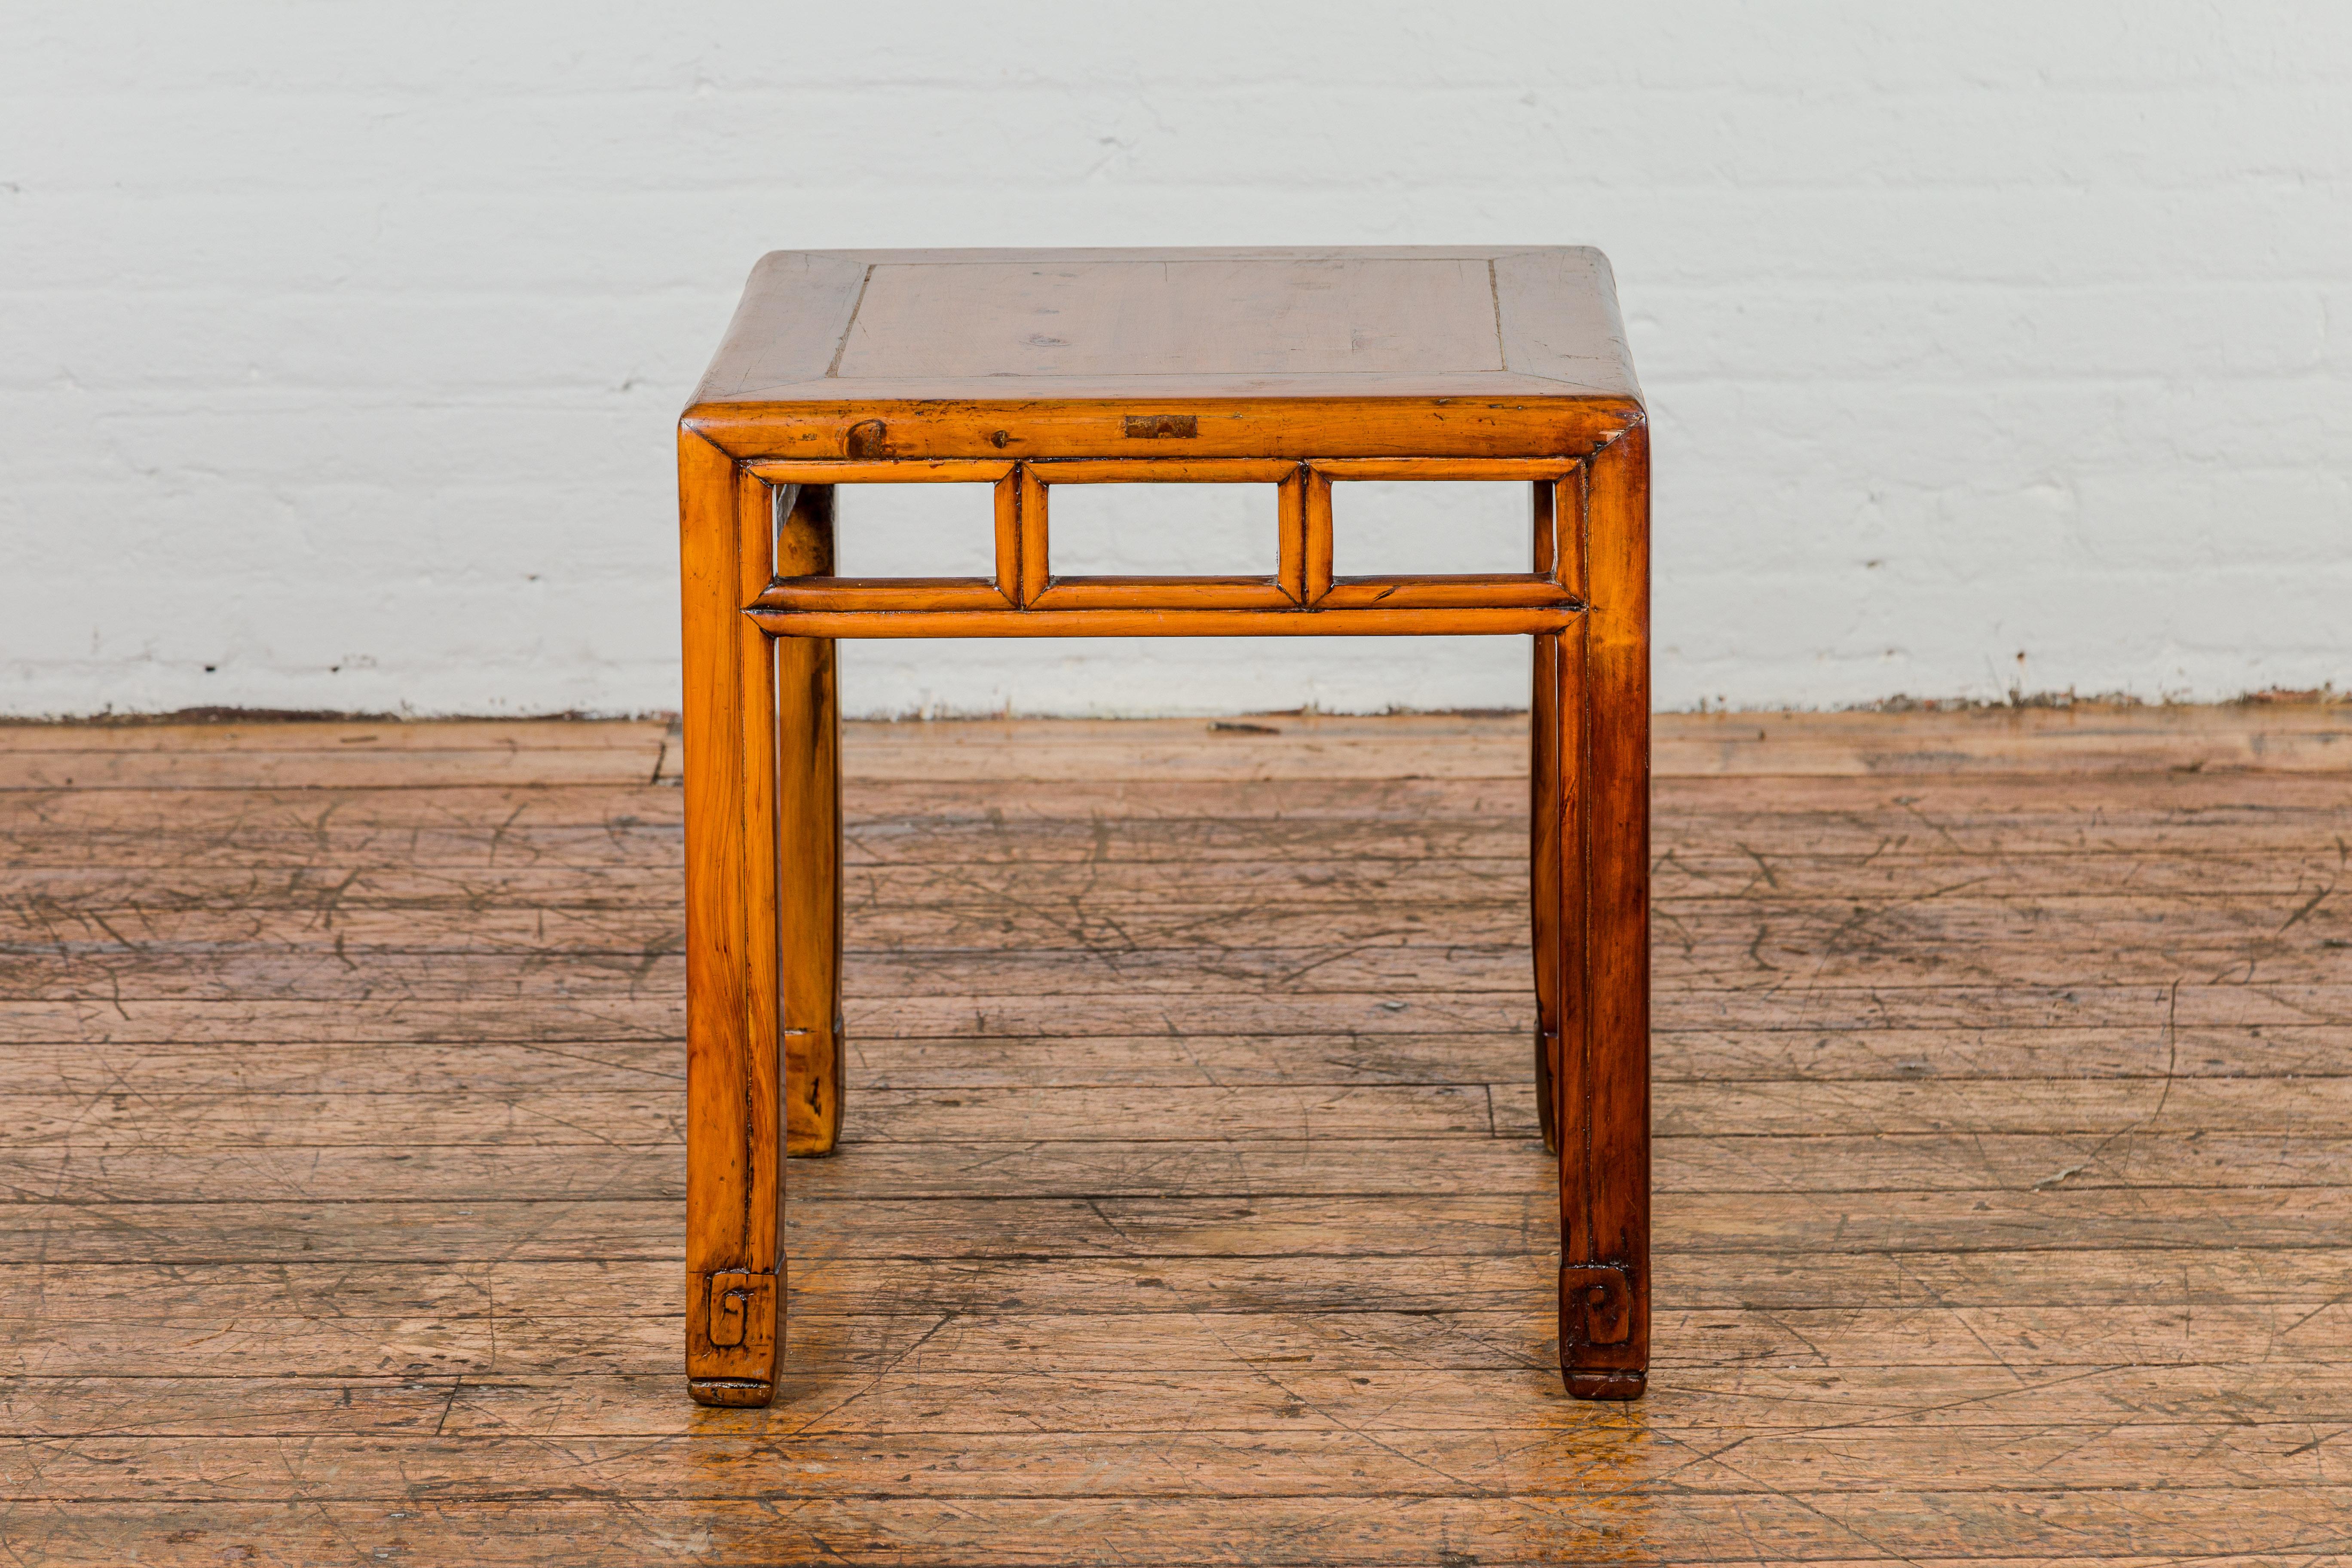 Late Qing Dynasty Period Side Table with Pillar Strut Motifs and Scroll Feet For Sale 8